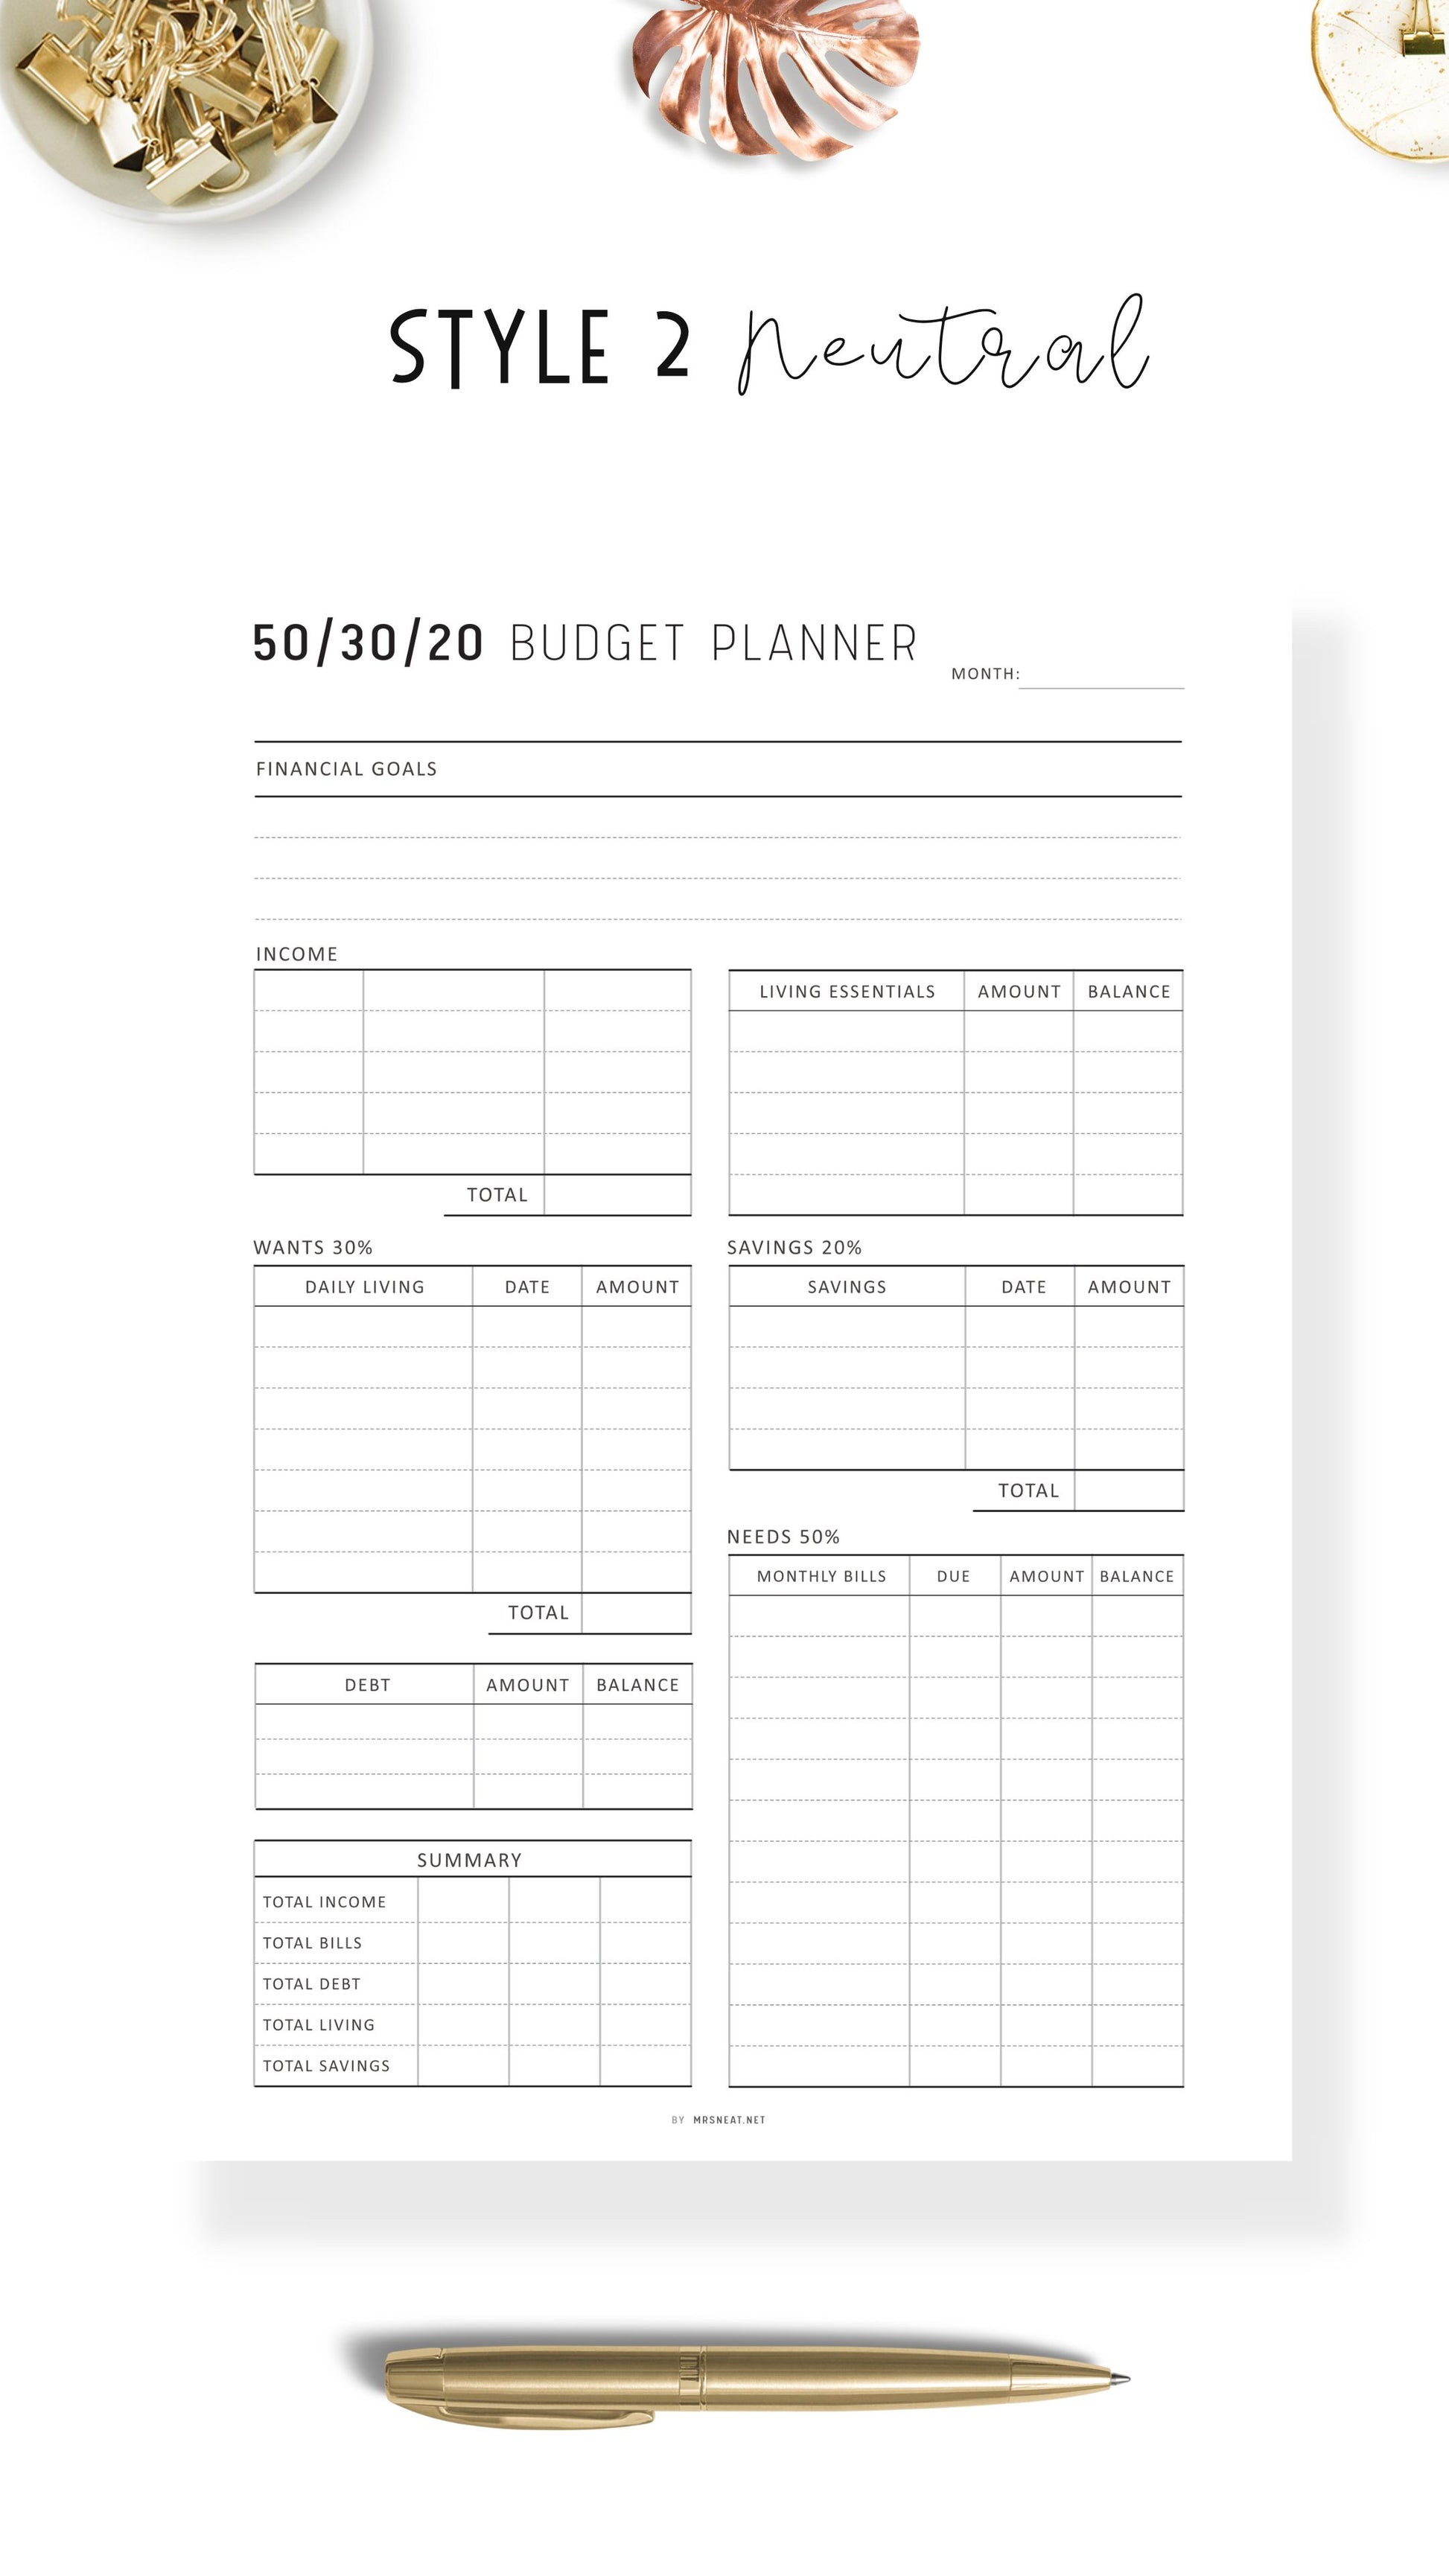 Minimalist 50/30/20 Budget Tracker Template Printable, Monthly Budget Planner, Colorful Page, Digital Budget Planner, A4, A5, Letter, Half Letter, PDF